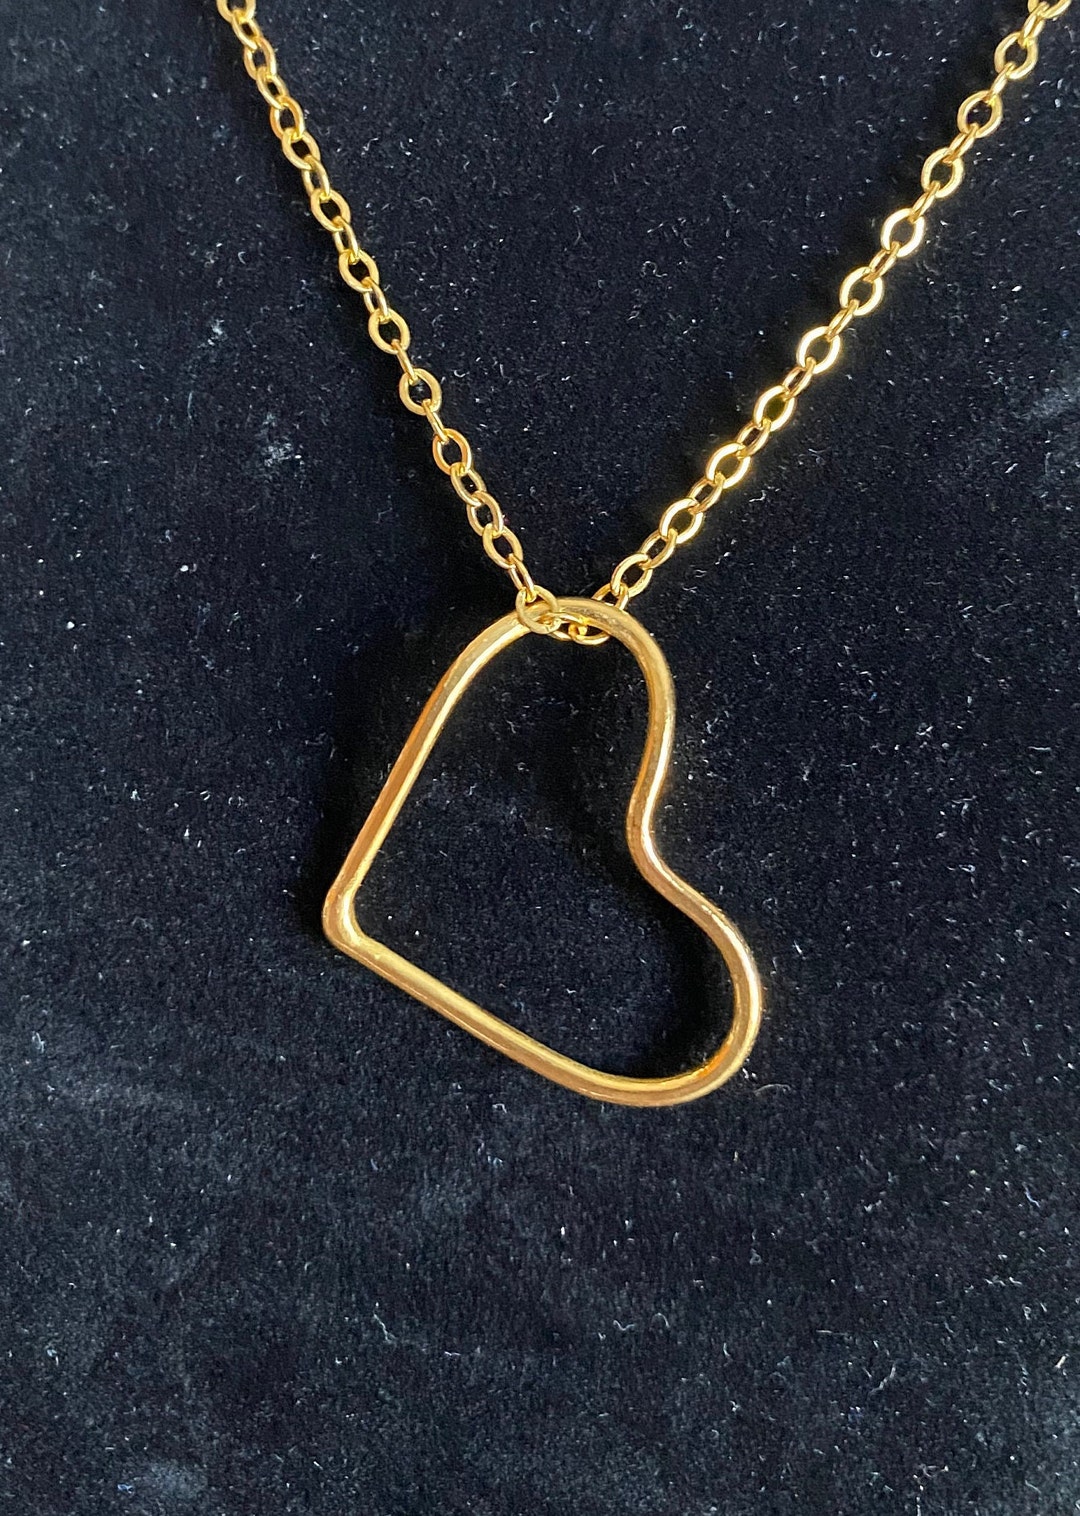 24K Pure Solid Gold Hand Forged Large Heart Pendant - Etsy